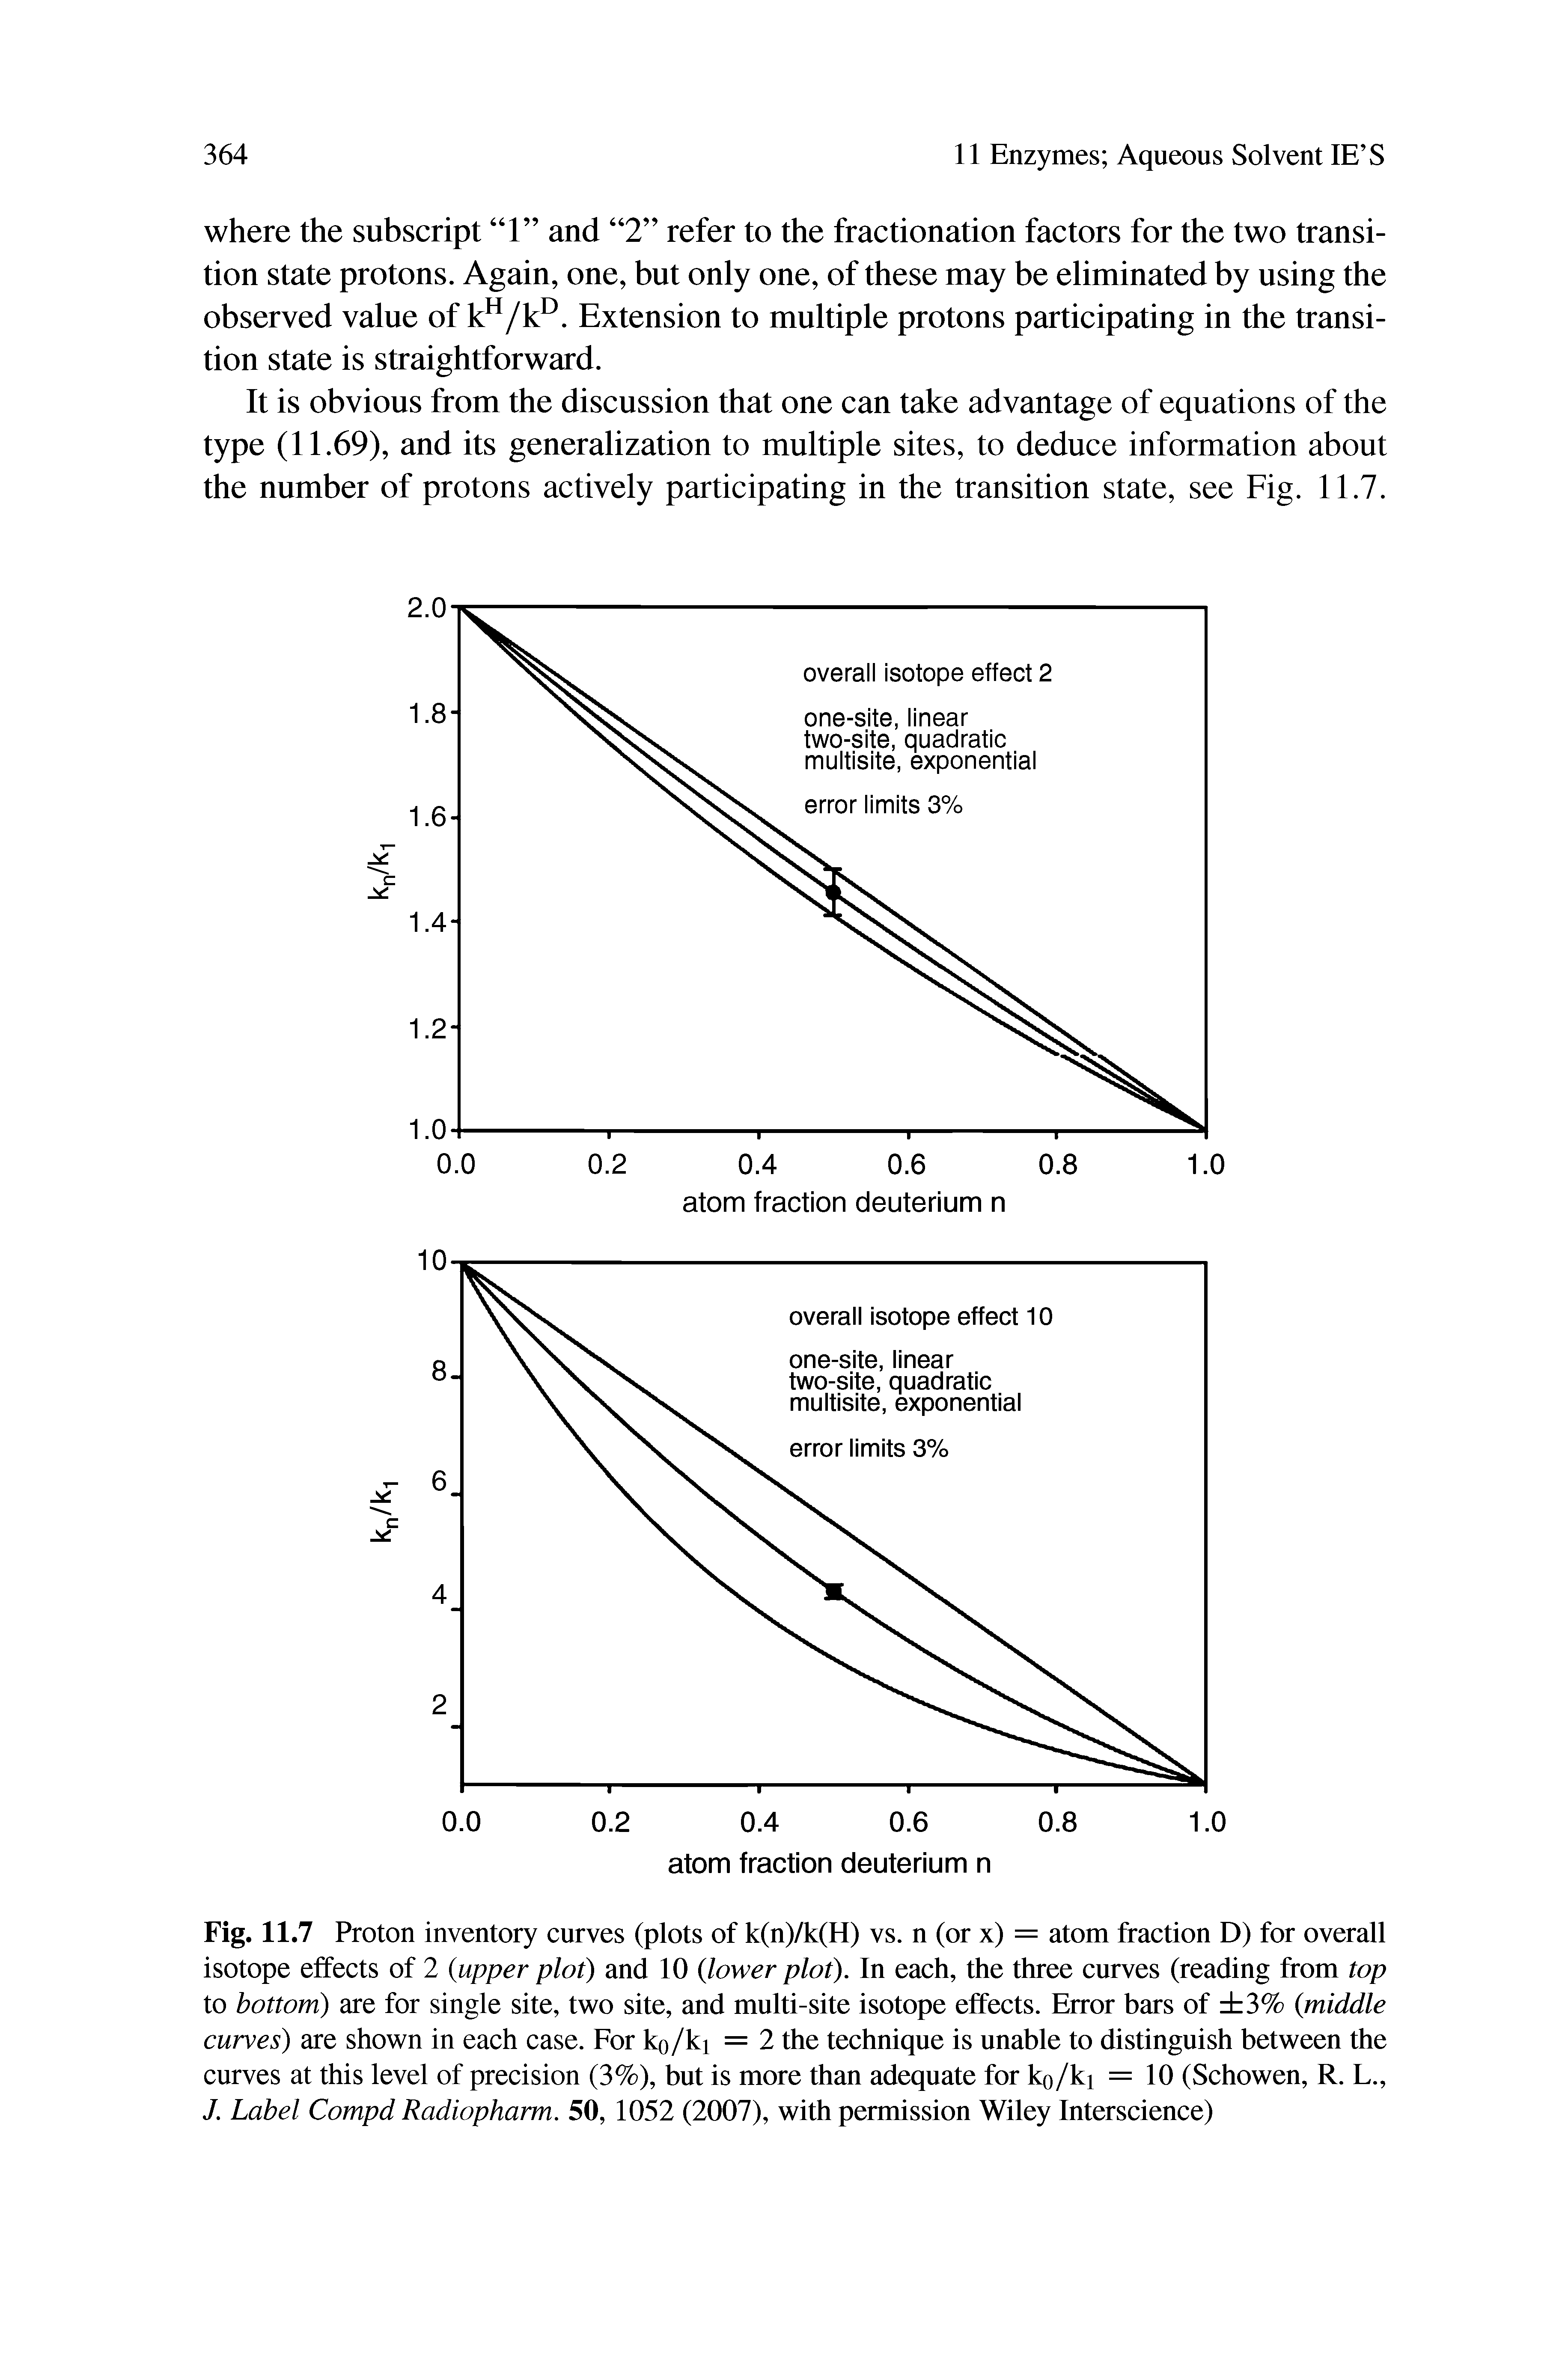 Fig. 11.7 Proton inventory curves (plots of k(n)/k(H) vs. n (or x) = atom fraction D) for overall isotope effects of 2 (upper plot) and 10 (lower plot). In each, the three curves (reading from top to bottom) are for single site, two site, and multi-site isotope effects. Error bars of 3% middle curves) are shown in each case. For ko/ki = 2 the technique is unable to distinguish between the curves at this level of precision (3%), but is more than adequate for ko/ki = 10 (Schowen, R. L., J. Label Compd Radiopharm. 50, 1052 (2007), with permission Wiley Interscience)...